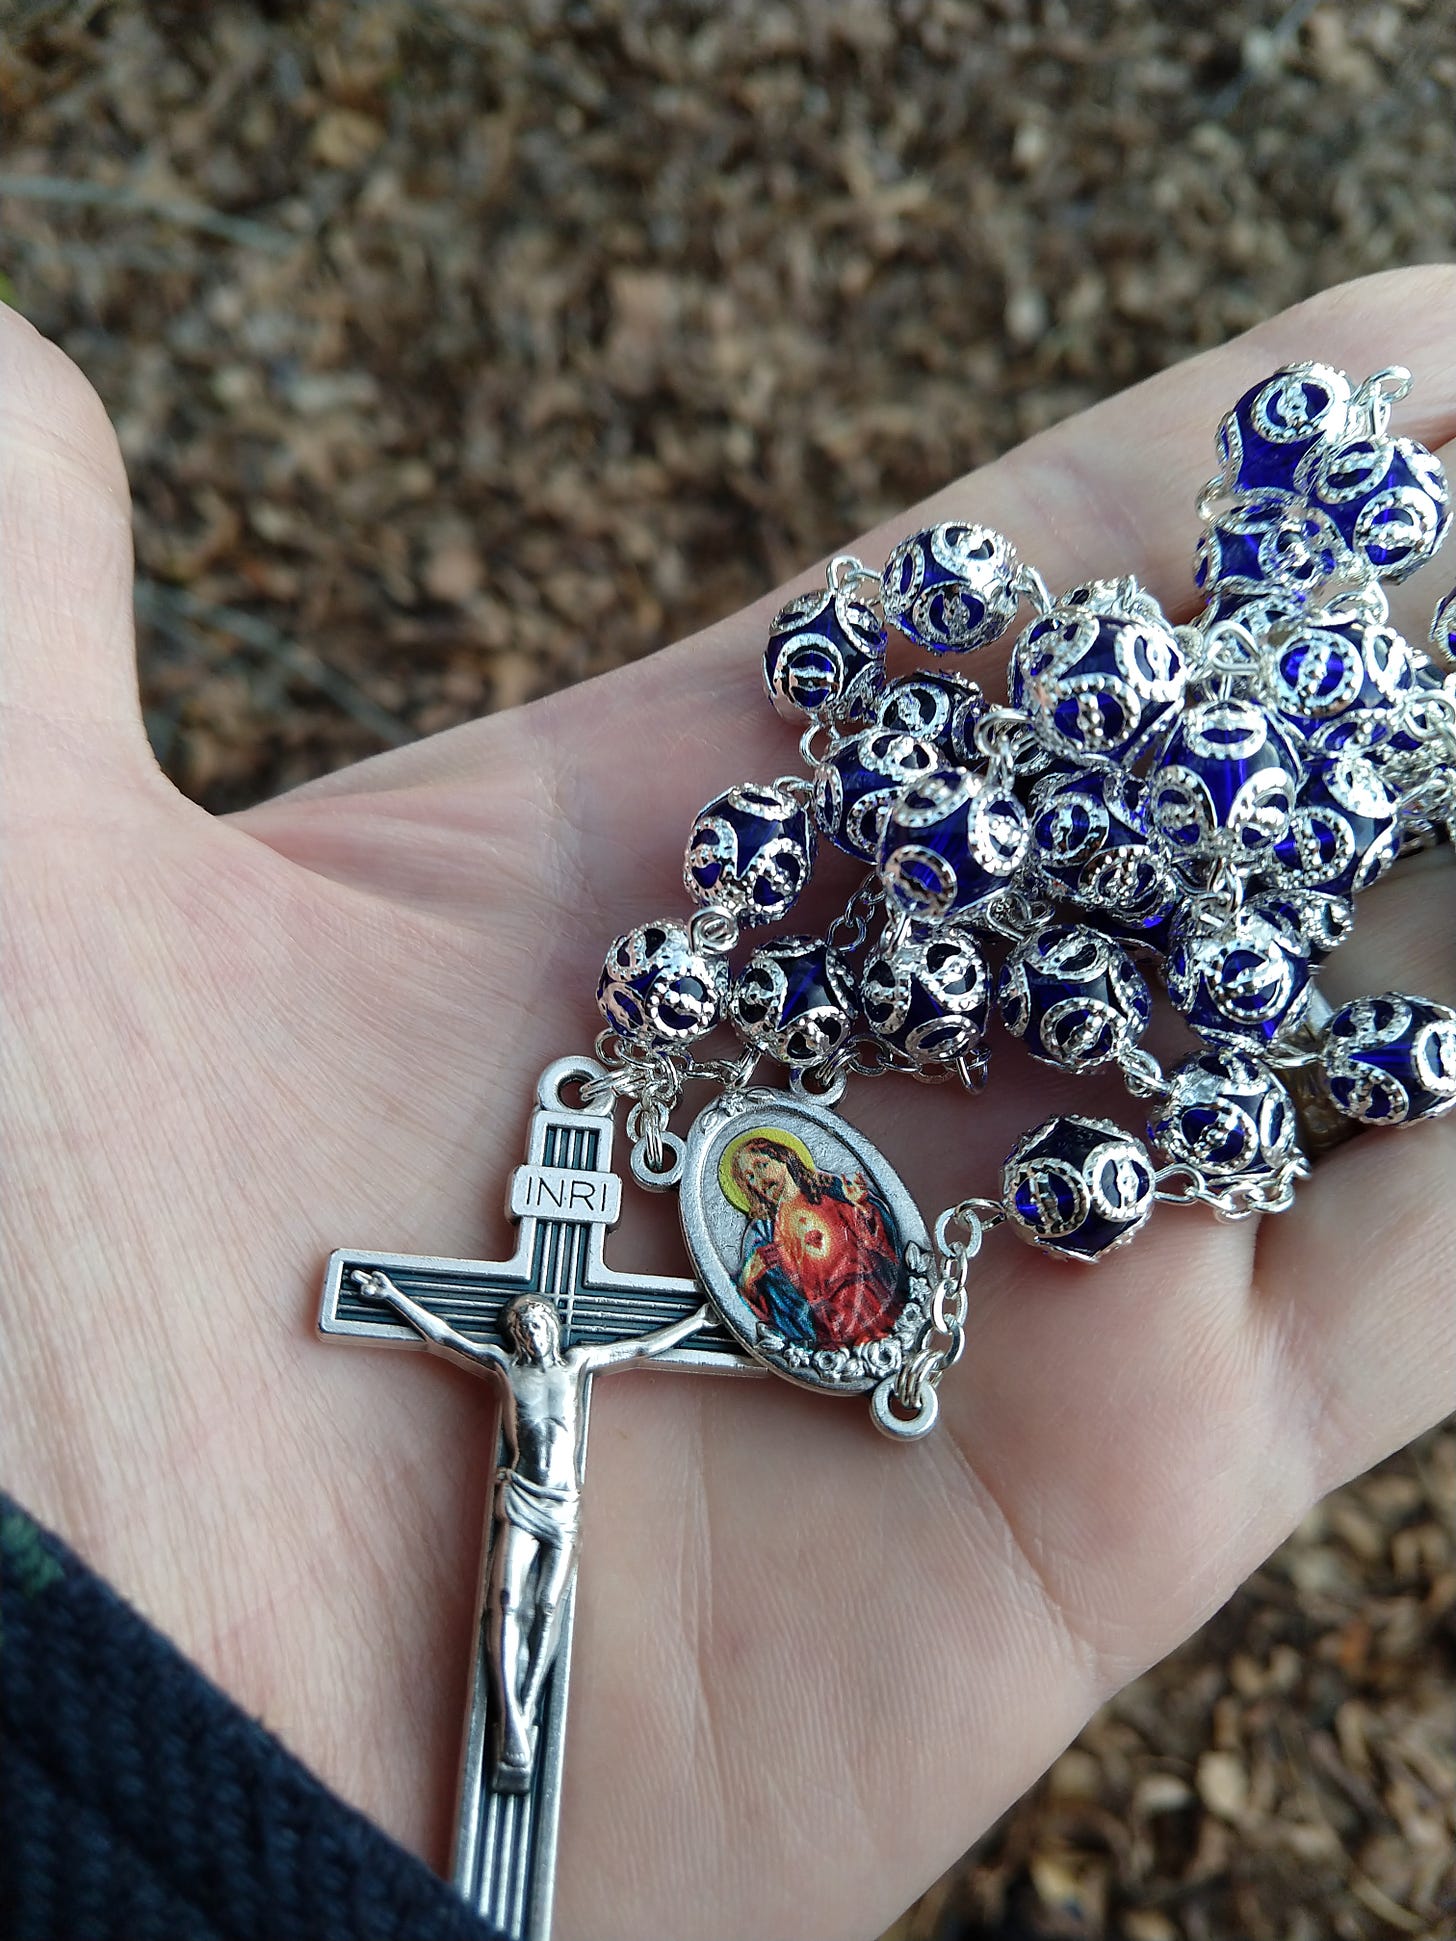 My hand holding a blue rosary with silver metalwork and a sacred heart medallion